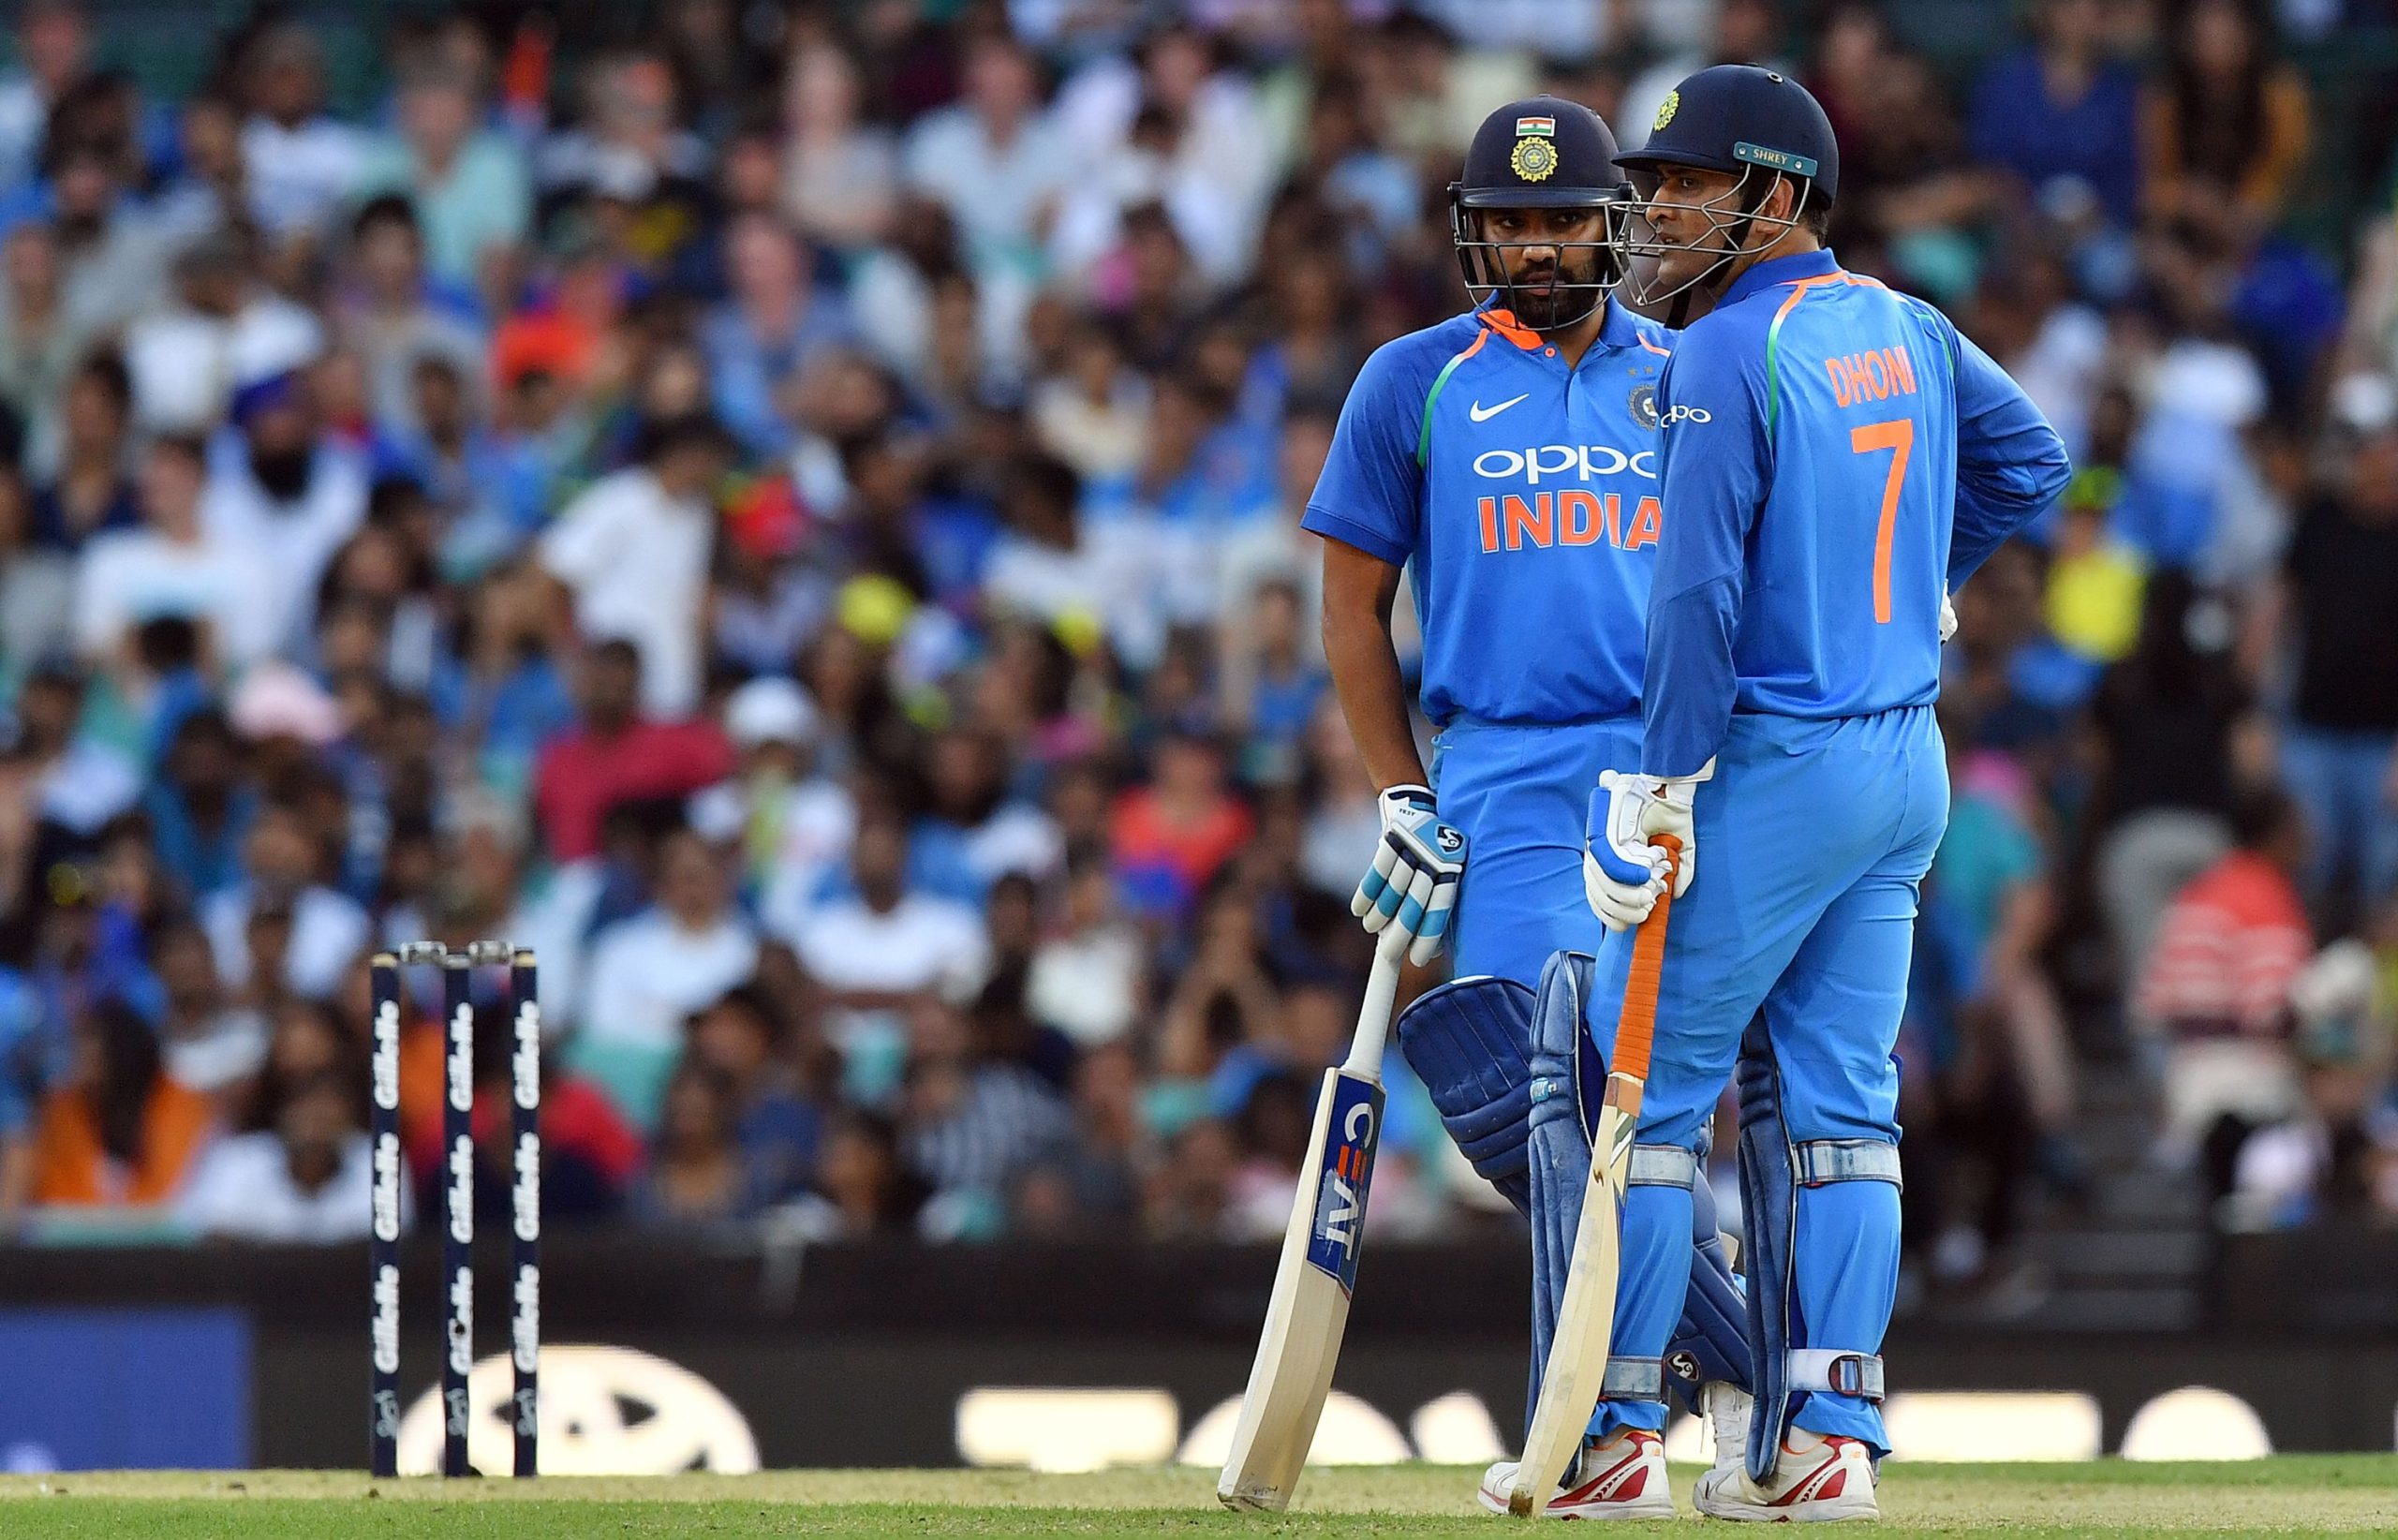 Happy Birthday MS Dhoni: 3 Moments When MS Dhoni Showed That He Is The Boss